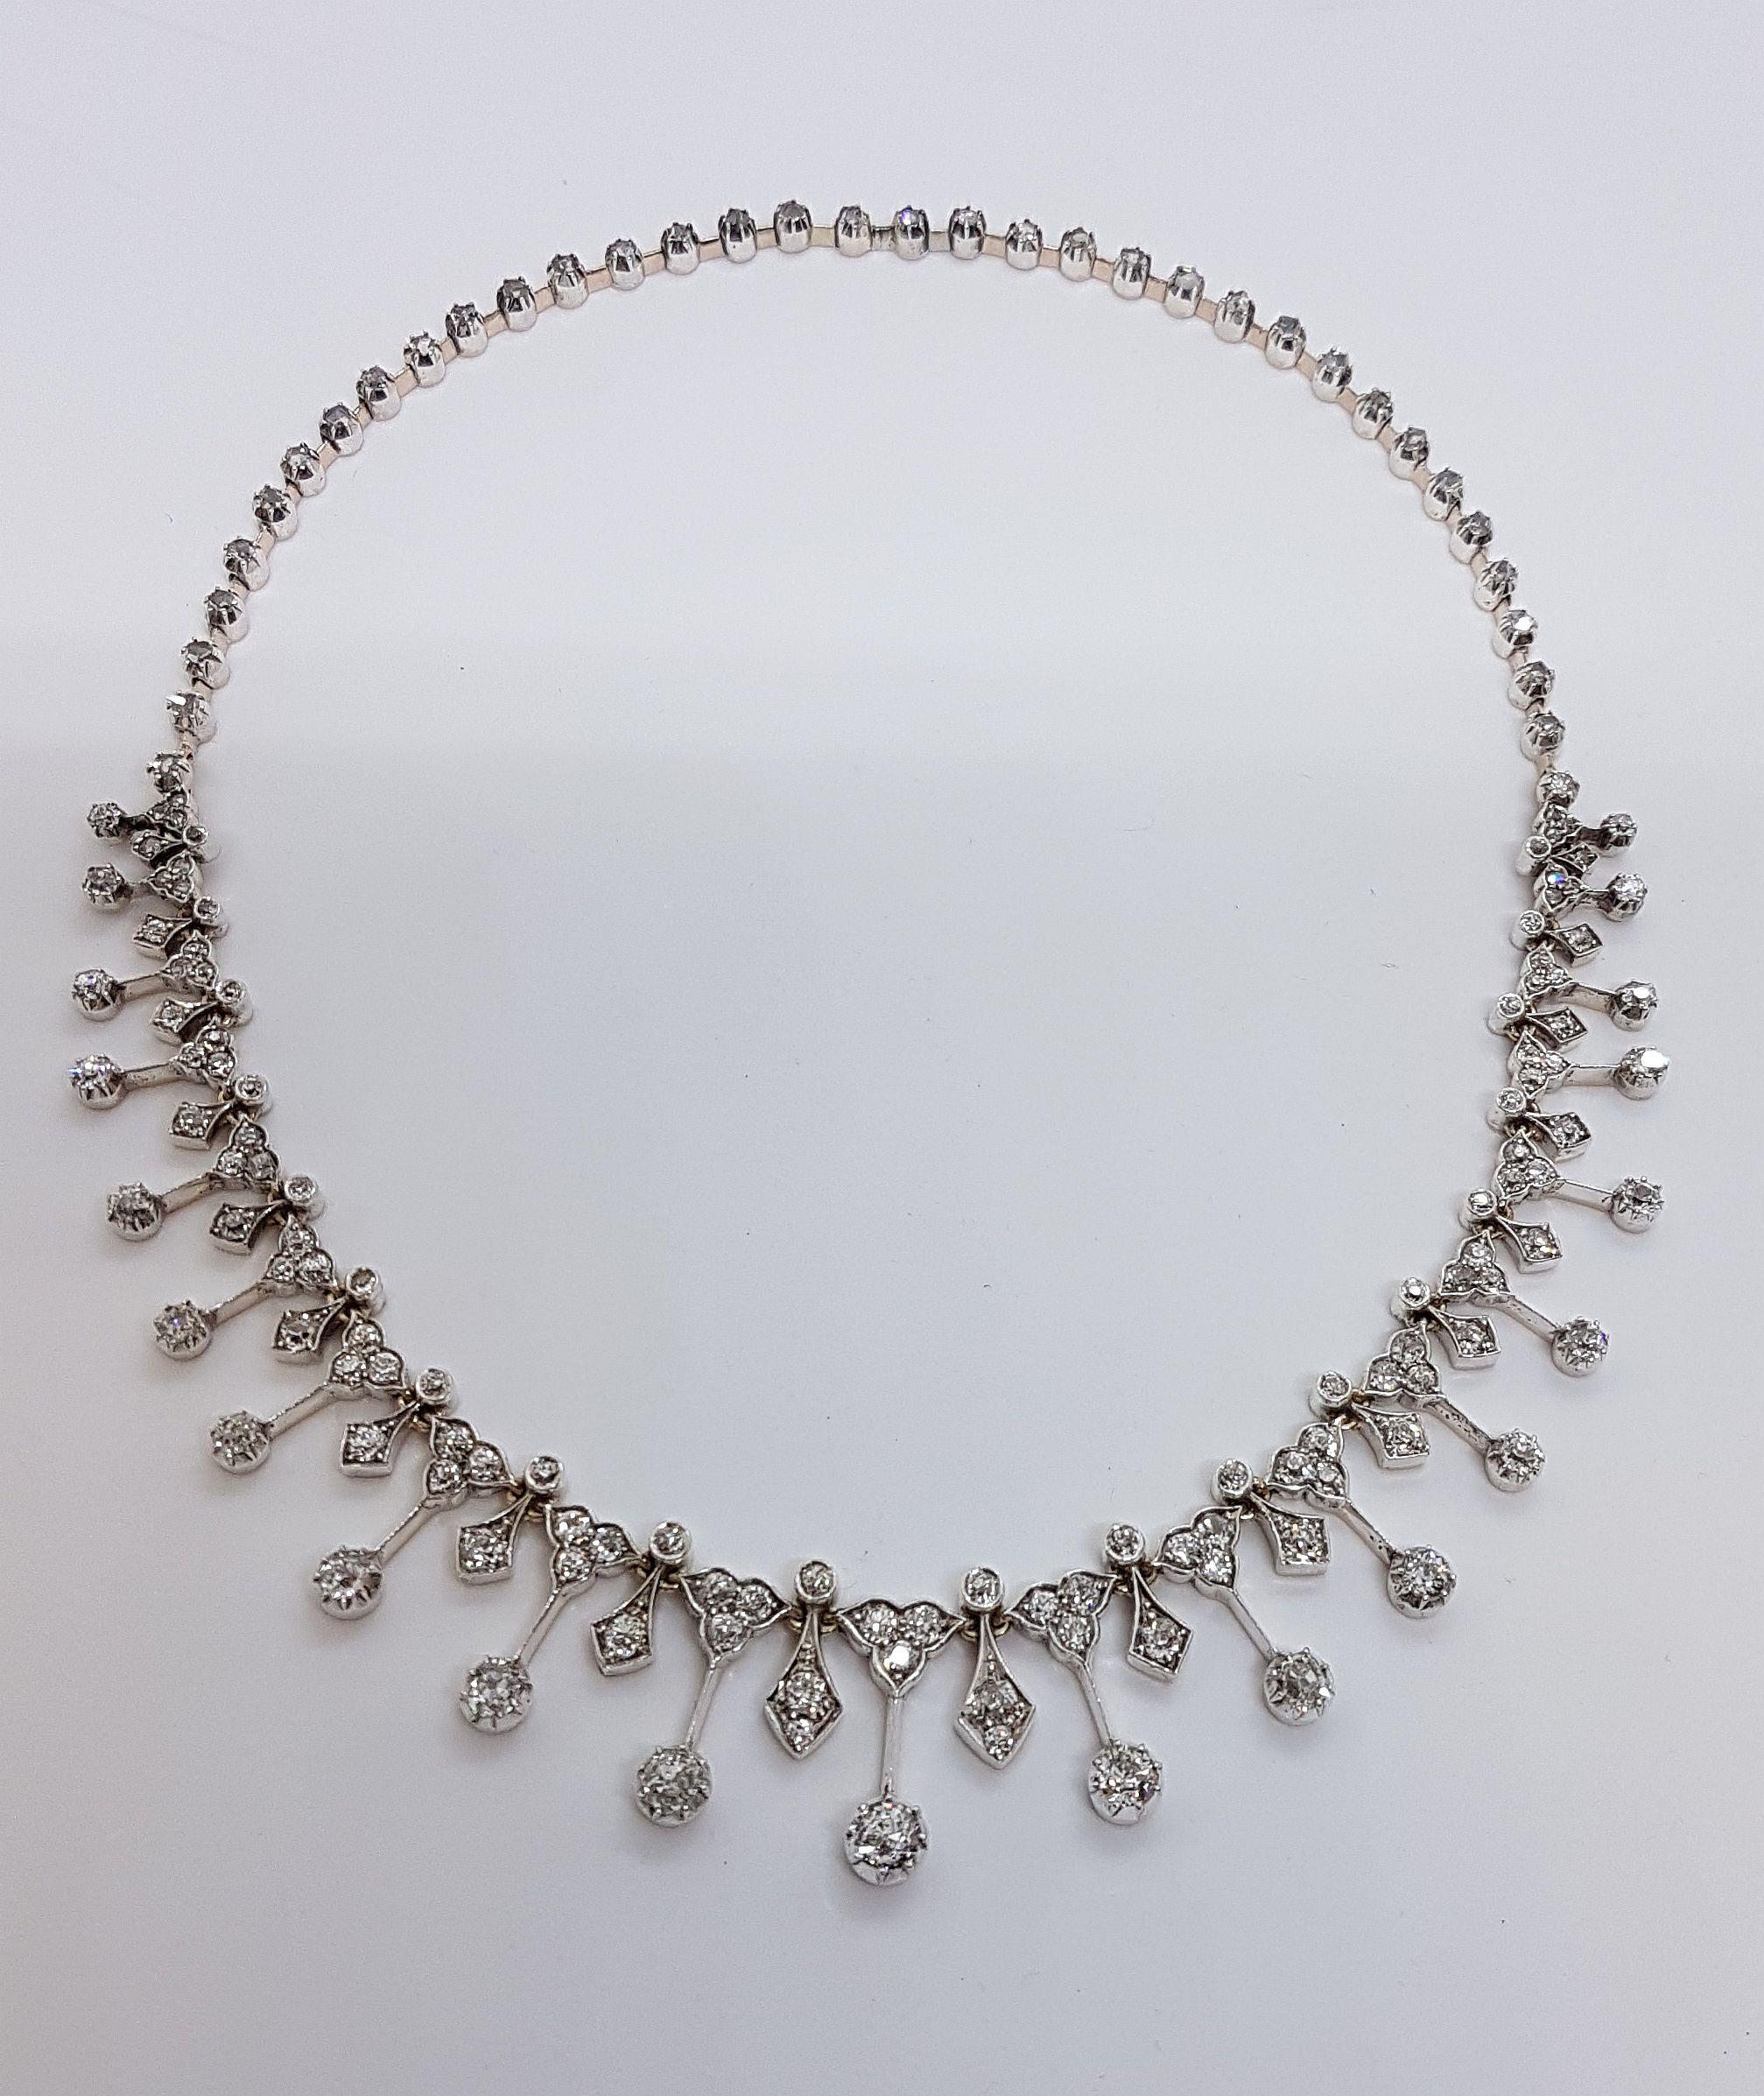 Magnificant tiara made of white gold with different size old european cut diamonds, totaling 8.56 carats.
Brook & Son Edinburgh, Jeweller to the Queen
The tiara can be taken apart and with an extension assembled to an elegant collier.
Very good